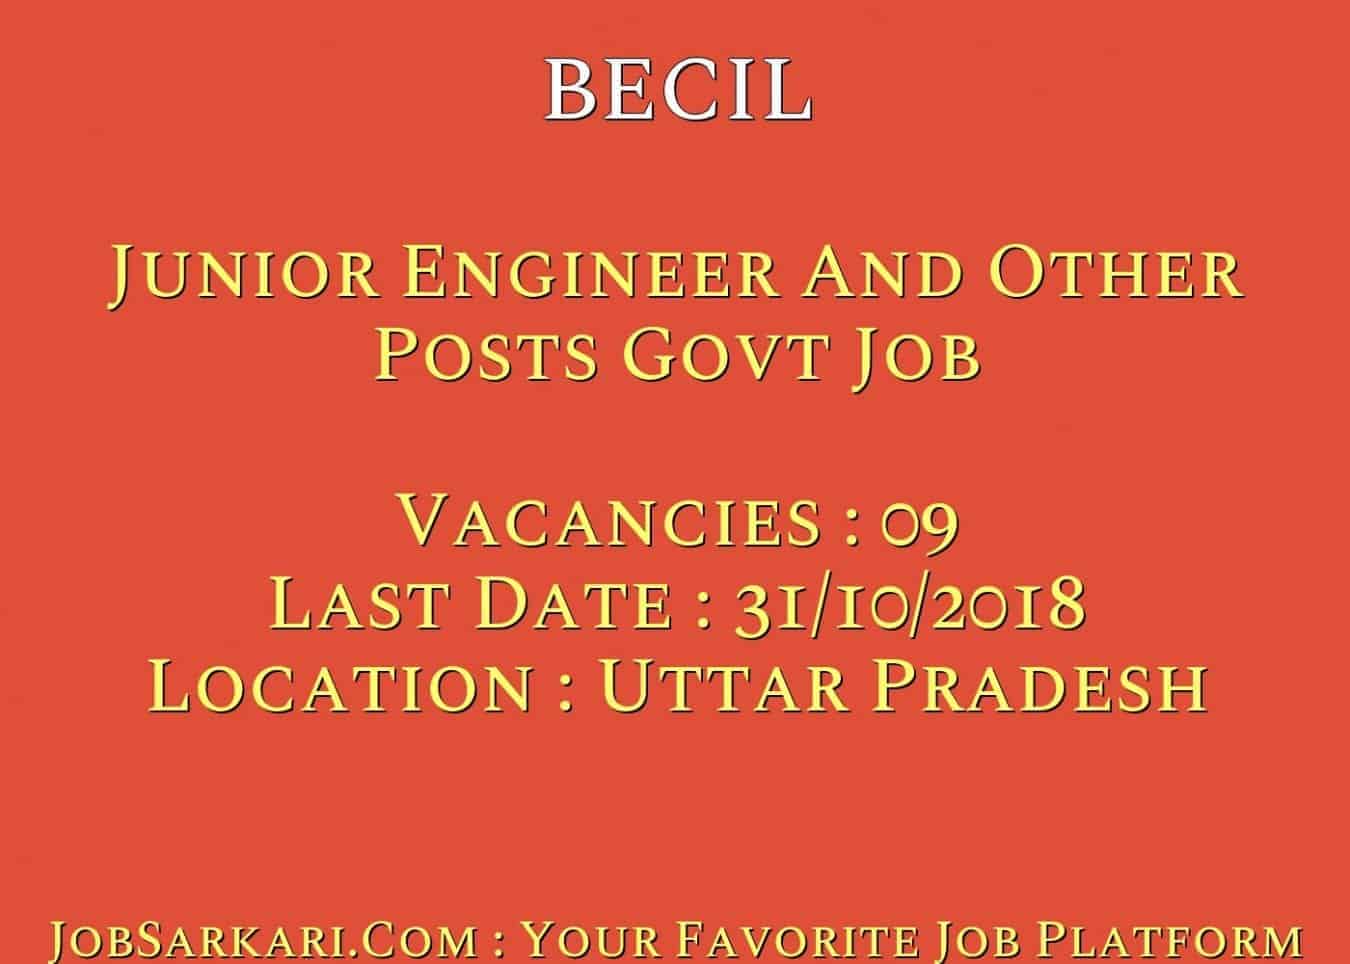 BECIL Recruitment 2018 For Junior Engineer And Other Posts Govt Job